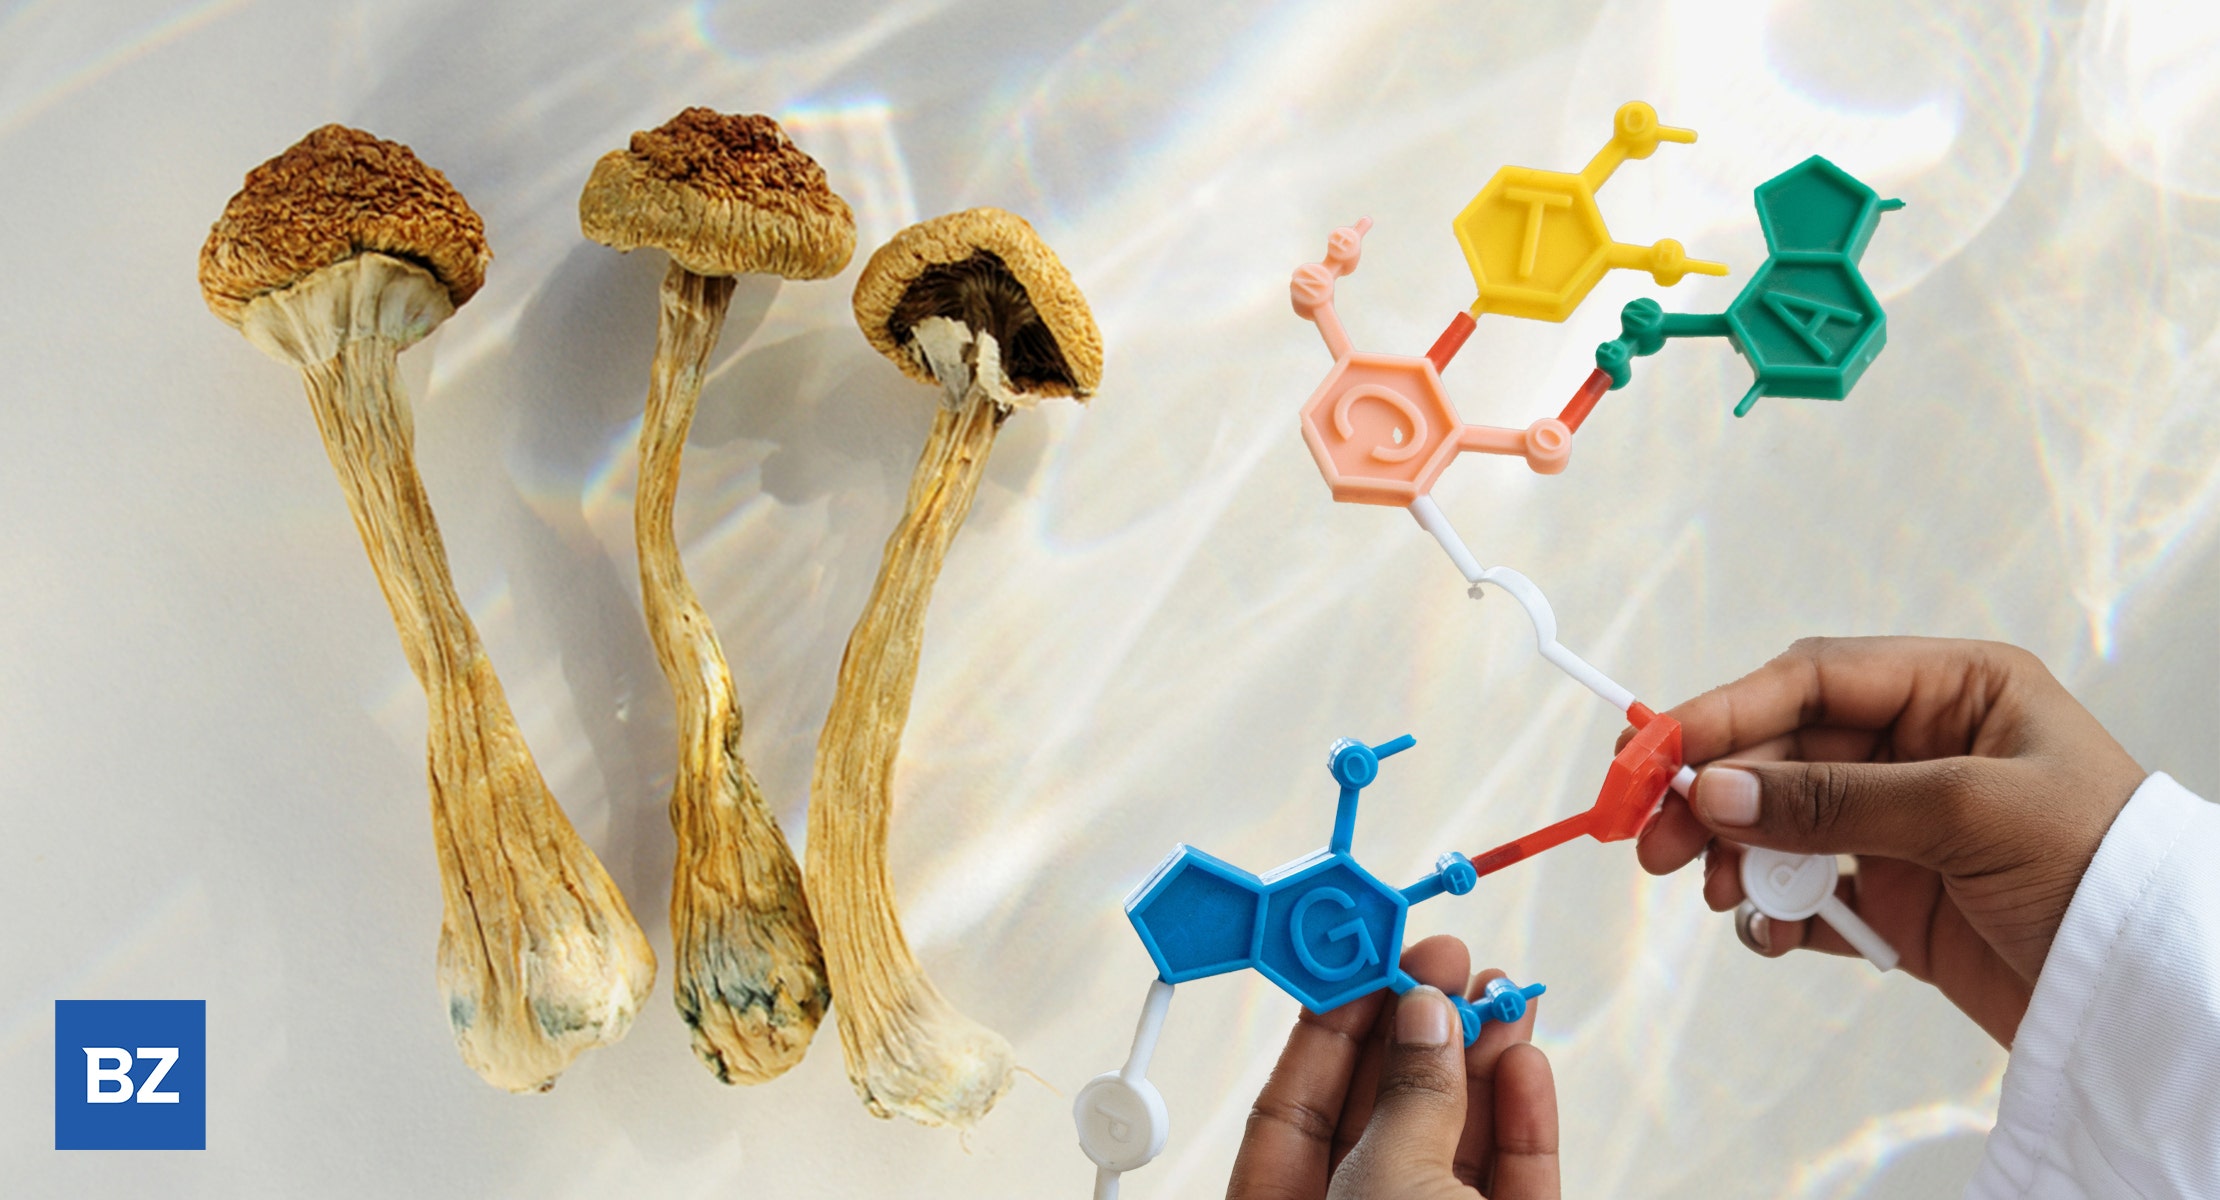 Canadian Psychedelics Company Launches Take-Home Psilocybin Trial For Some 300 Participants